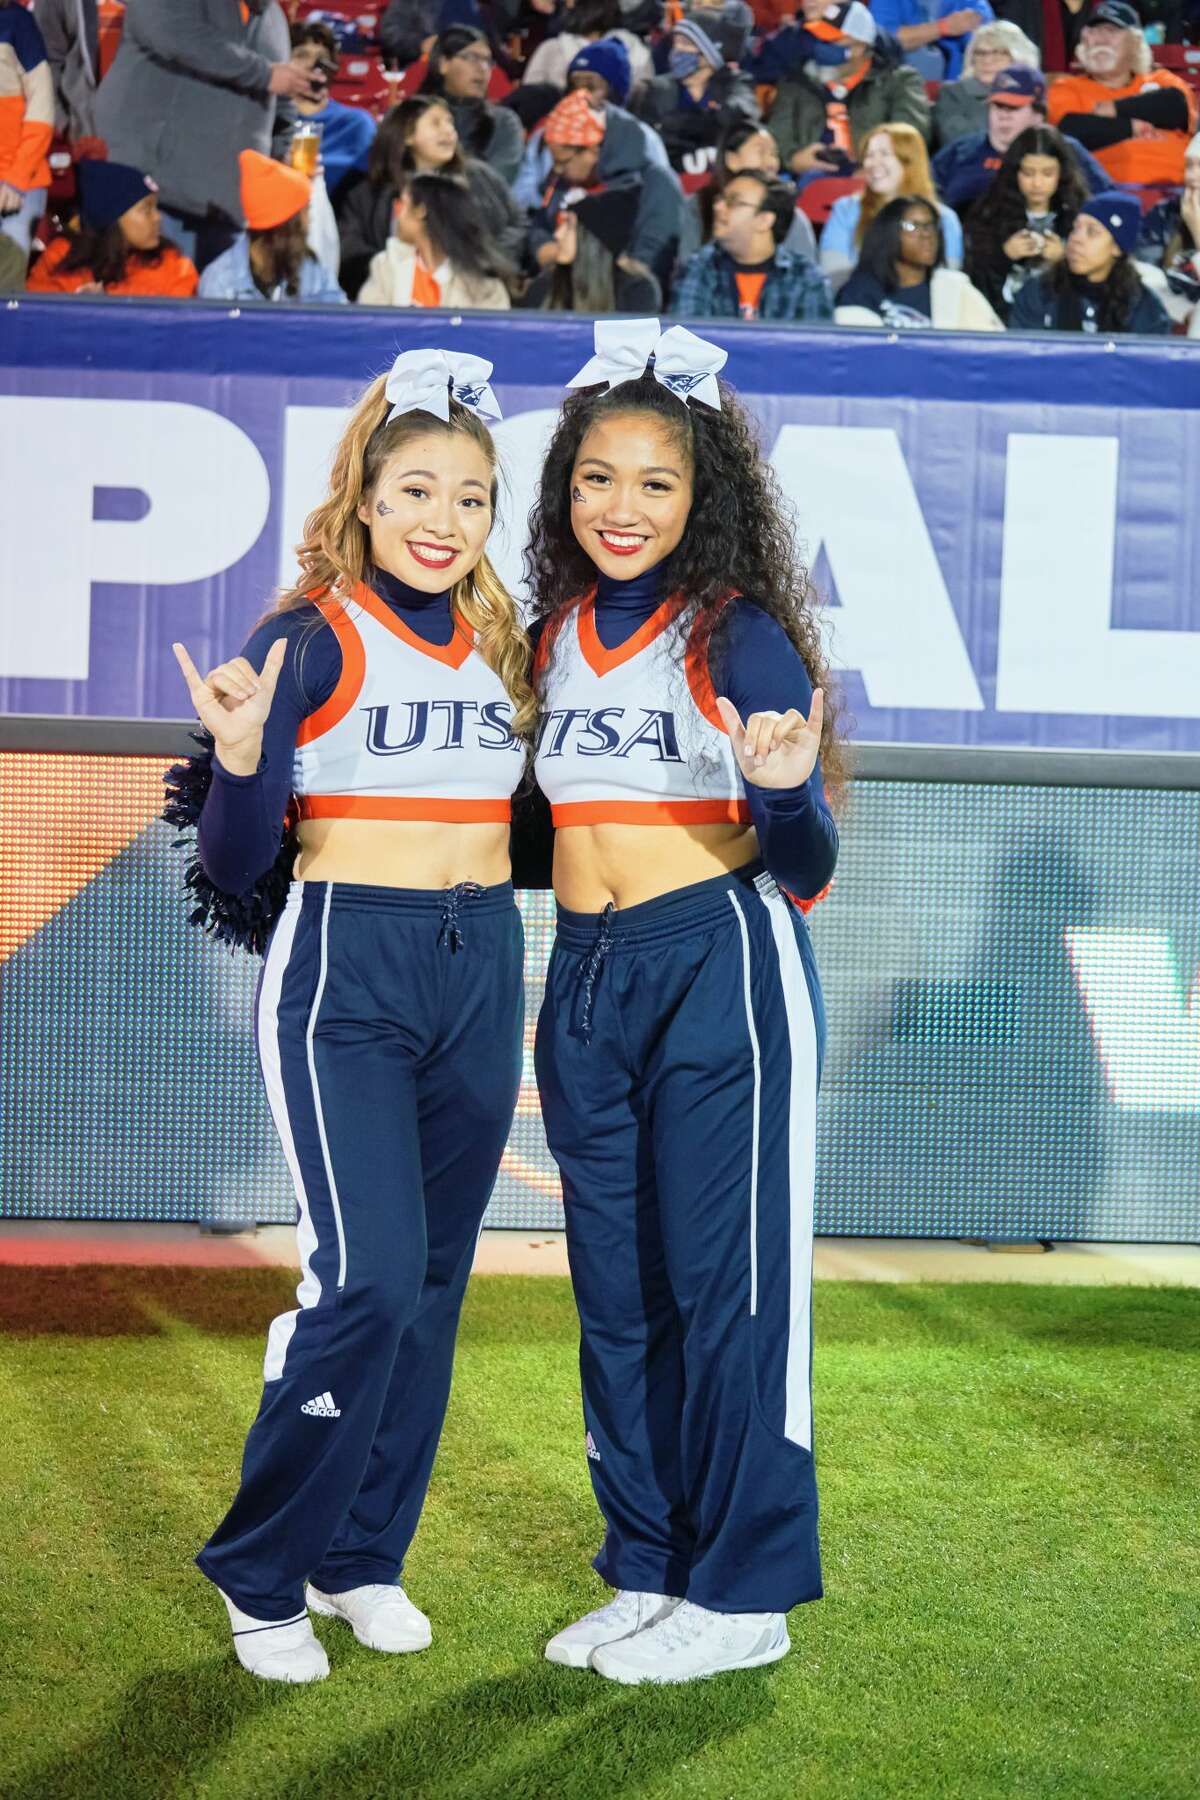 Scenes from Tuesday's Frisco Bowl in Frisco, Texas.